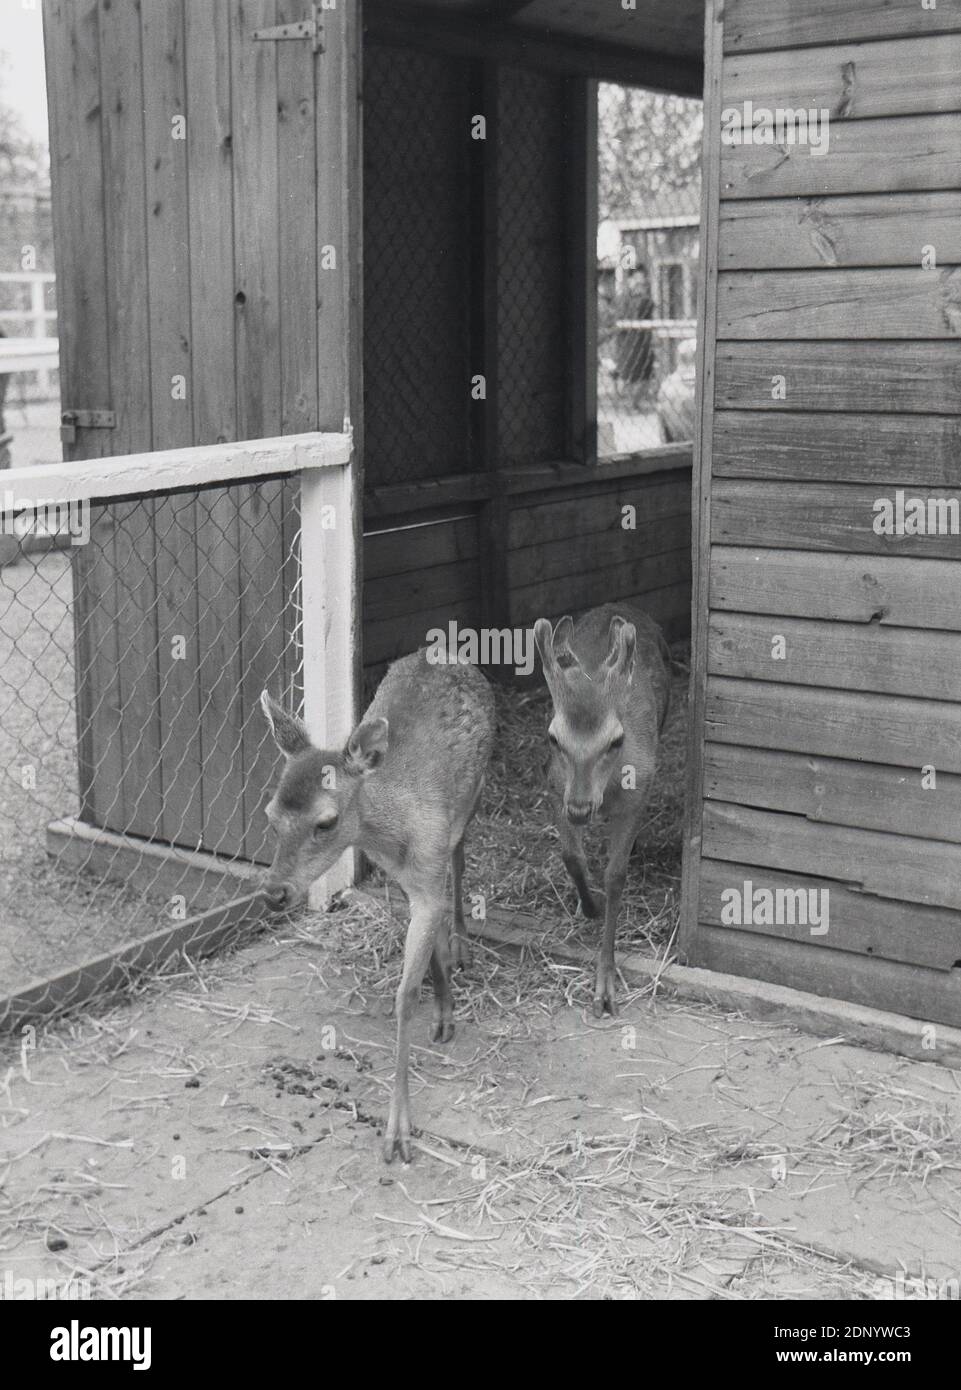 1969, historical, two young fawns, a mle and female, coming out of their enclosure at Flamingo Park Zoo, England, UK. Stock Photo